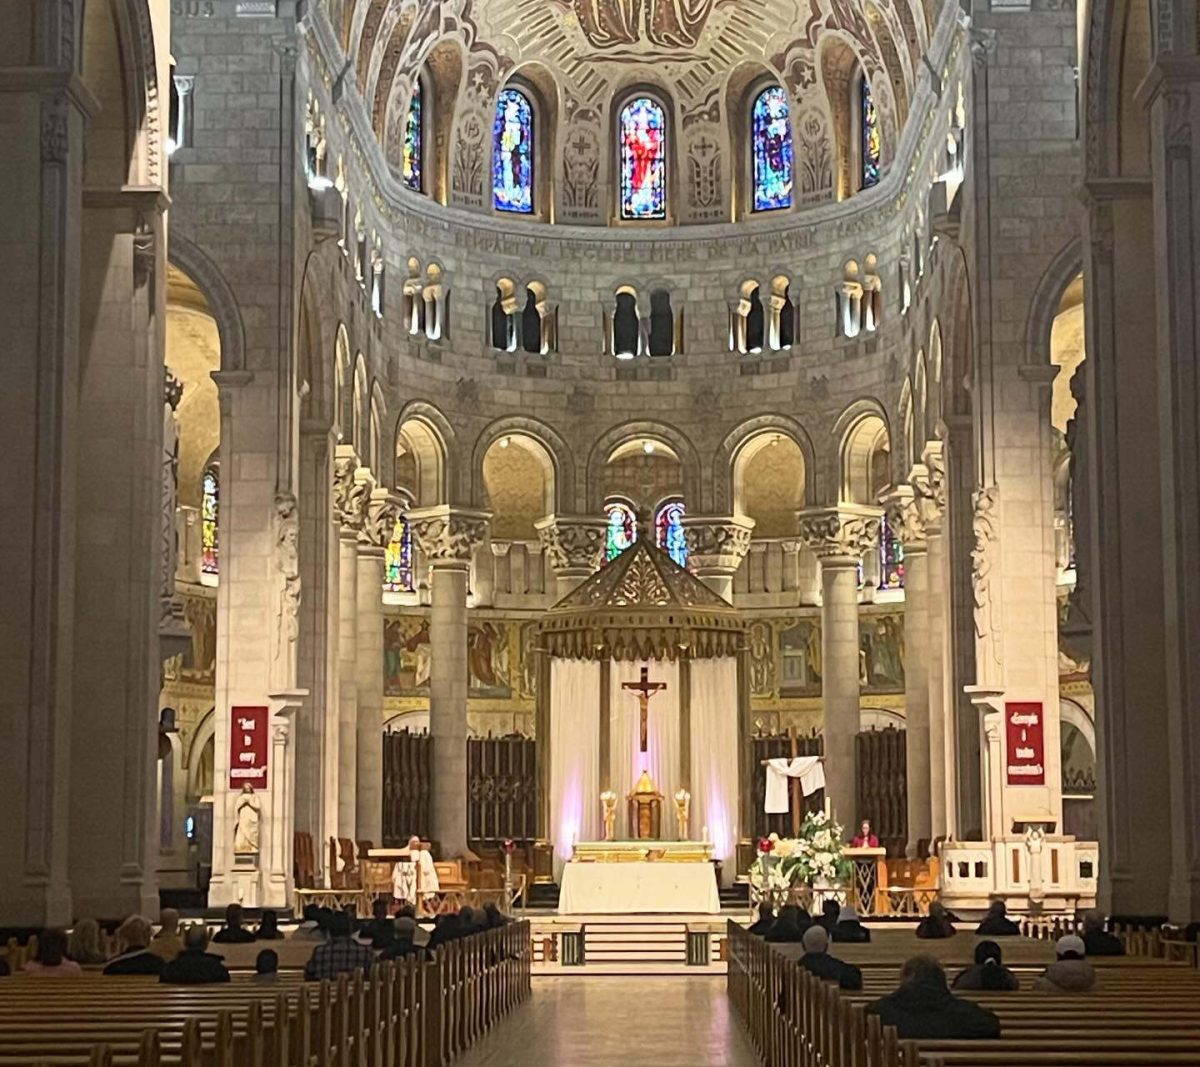 Students visited the Basilica of Saint Anne-de-Beaupré in Quebec, Canada. The Basilica of Saint Anne-de-Beaupré is a Roman Catholic church, and one of eight national shrines in all of Canada. 